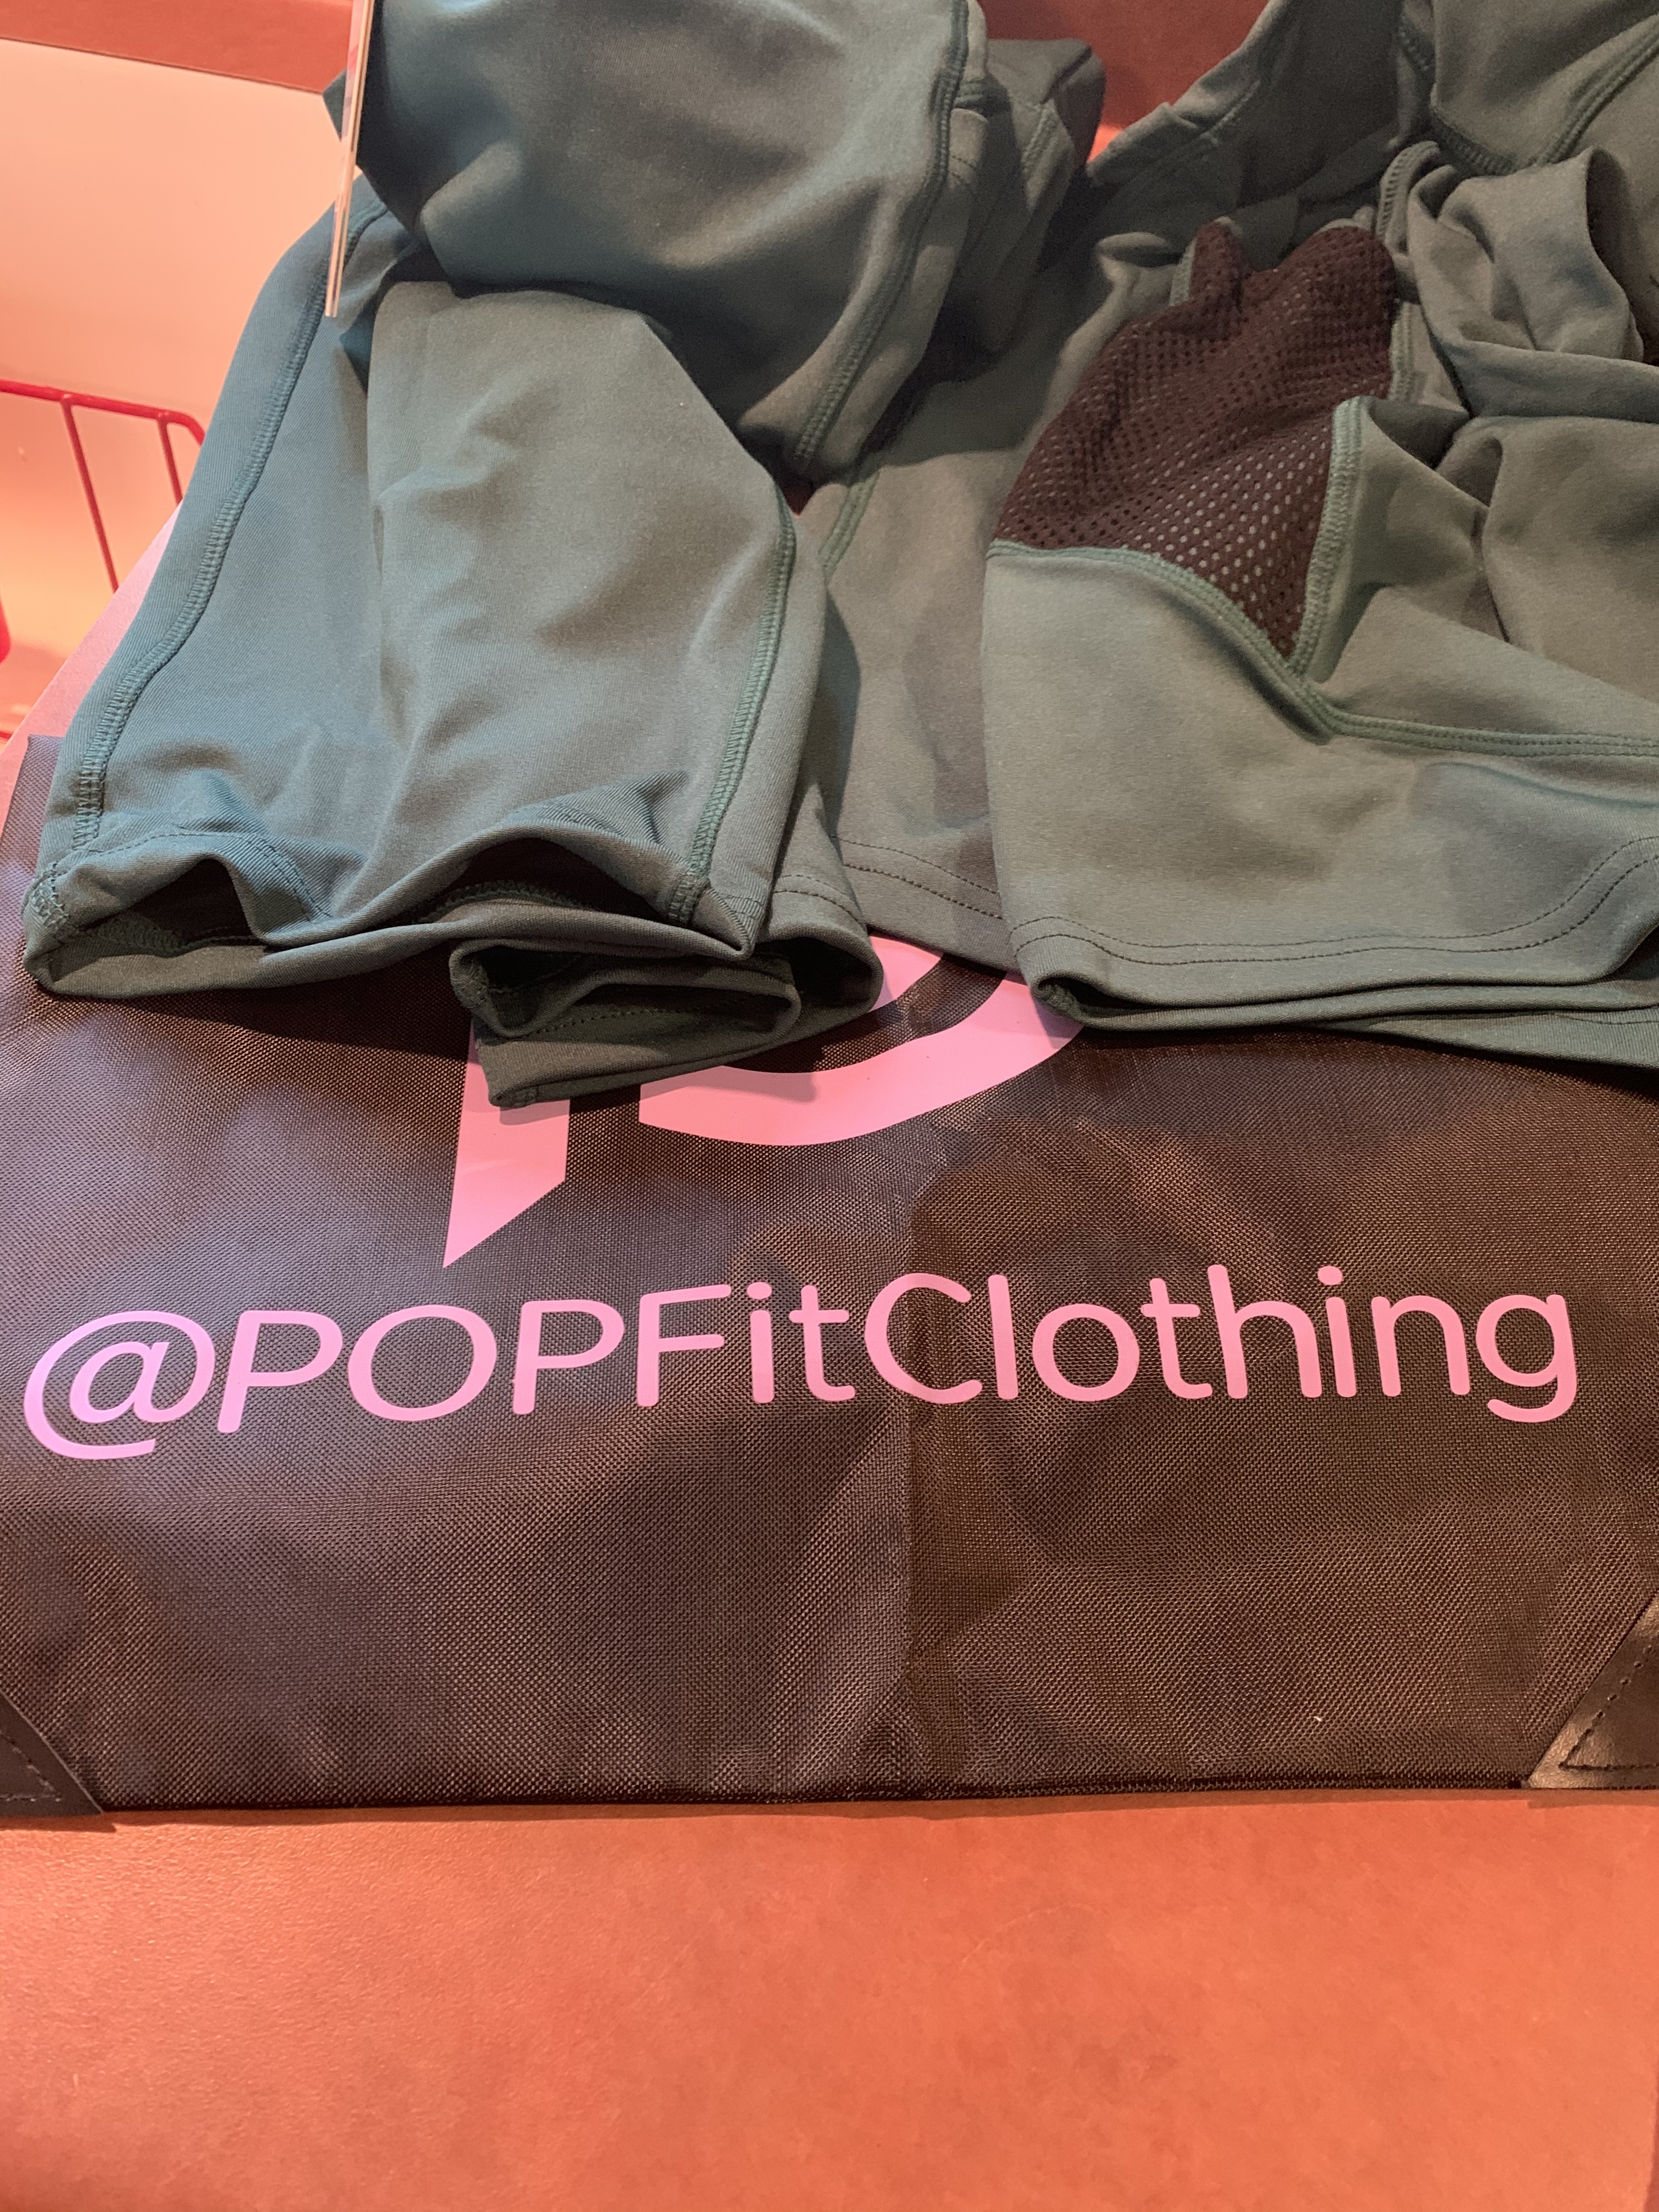 Free Leggings Explained and Tried On - Honest Review of Pop Fit